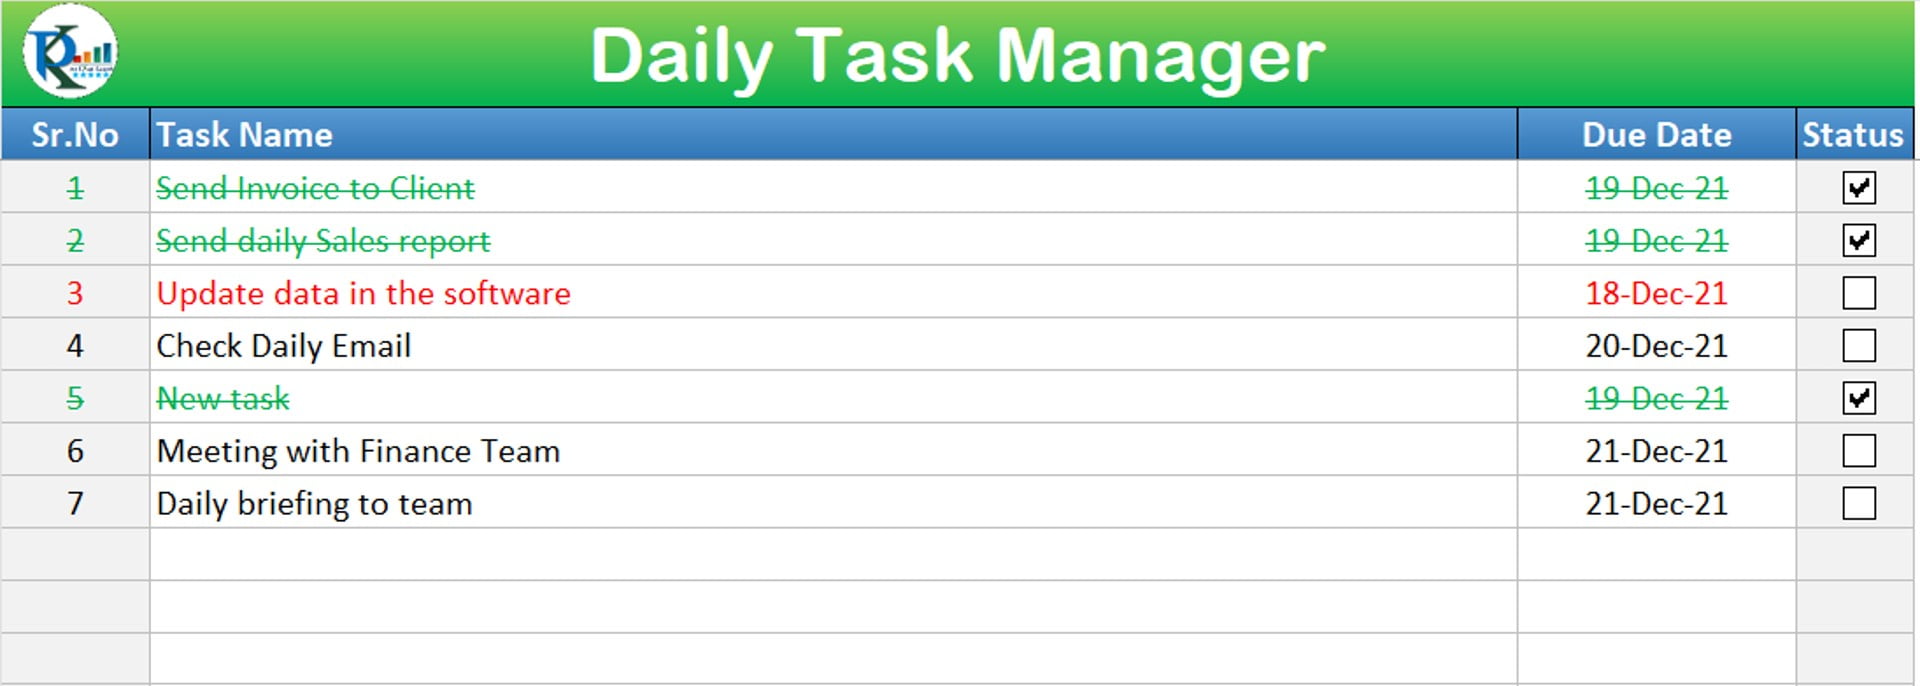 Daily Task Manager